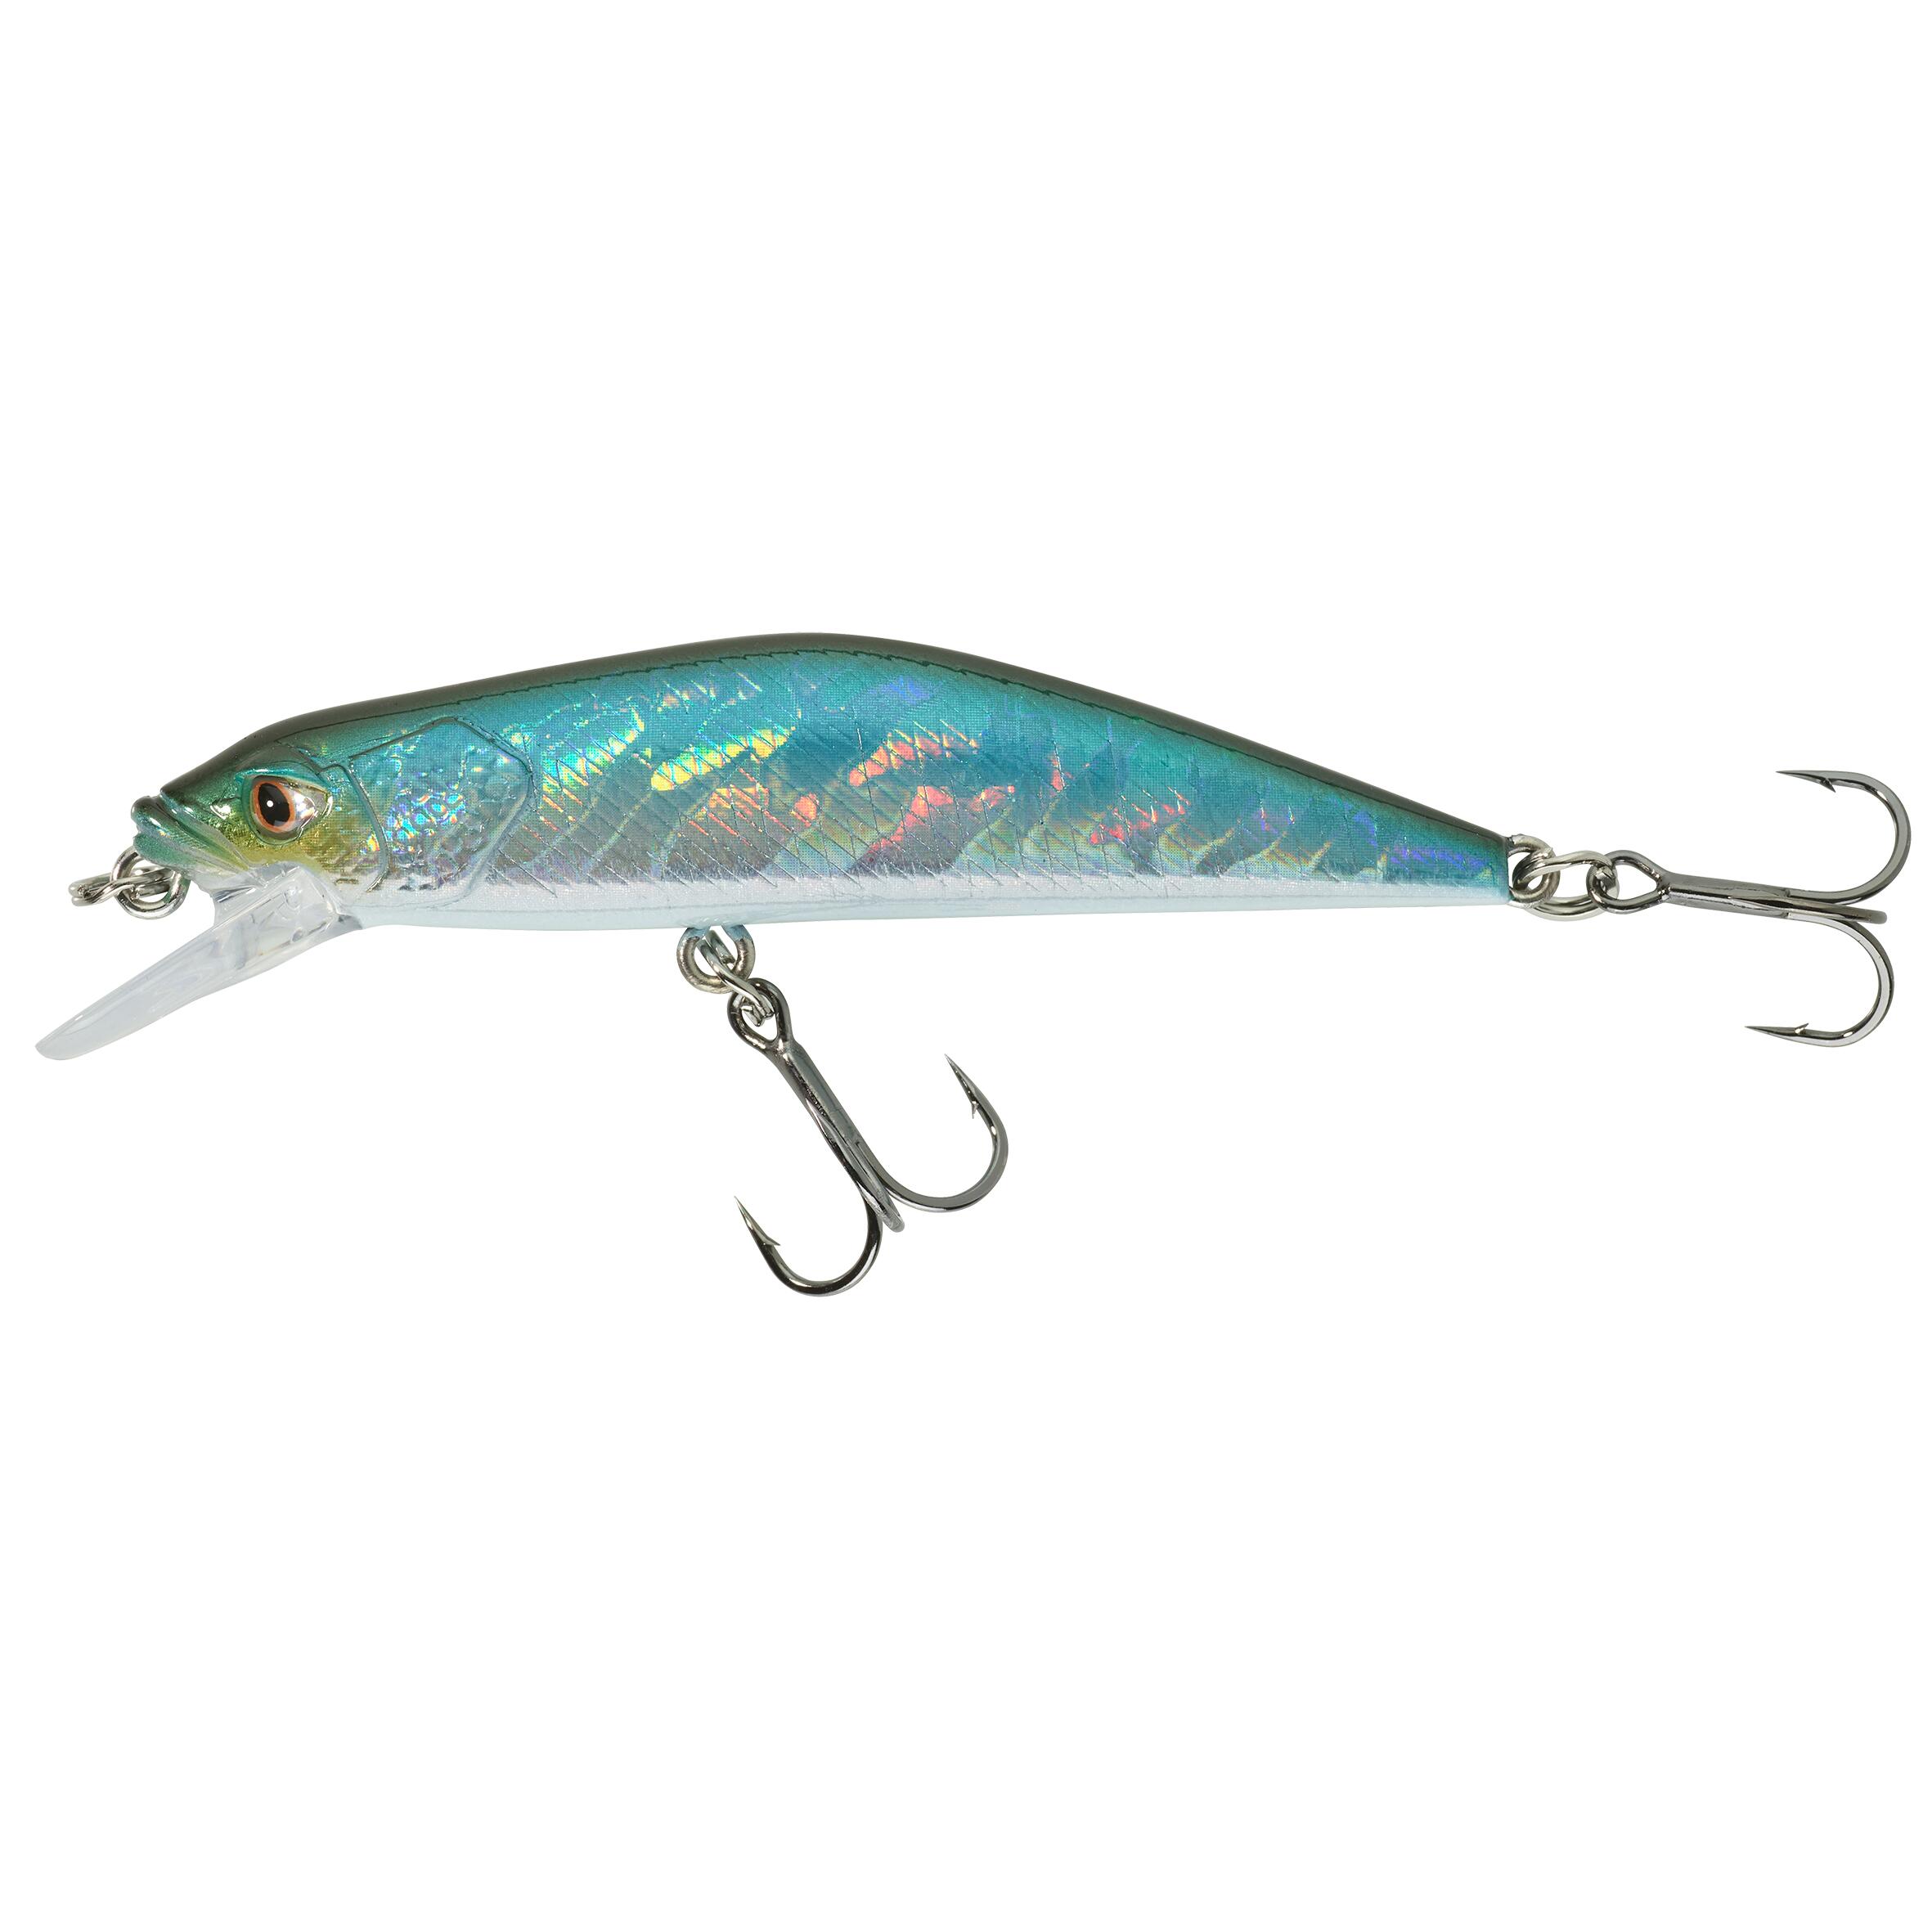 CAPERLAN MINNOW HARD LURE FOR TROUT WXM MNWFS 70 US - BLUE BACK